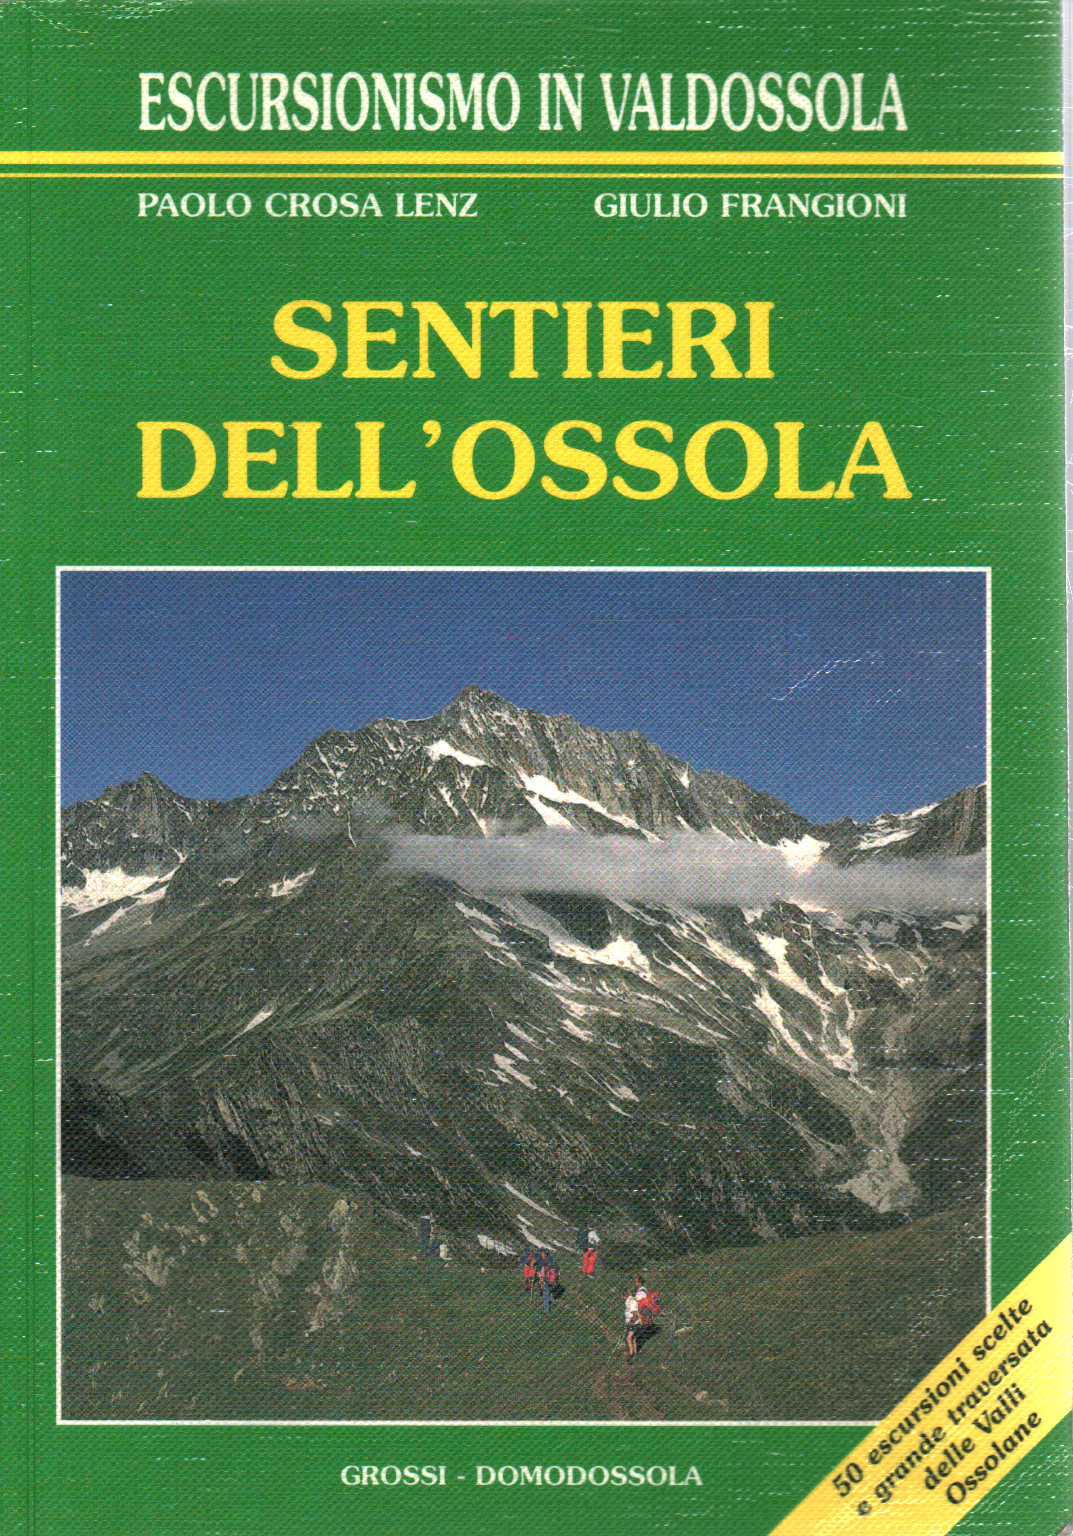 Paths of Ossola, s.a.